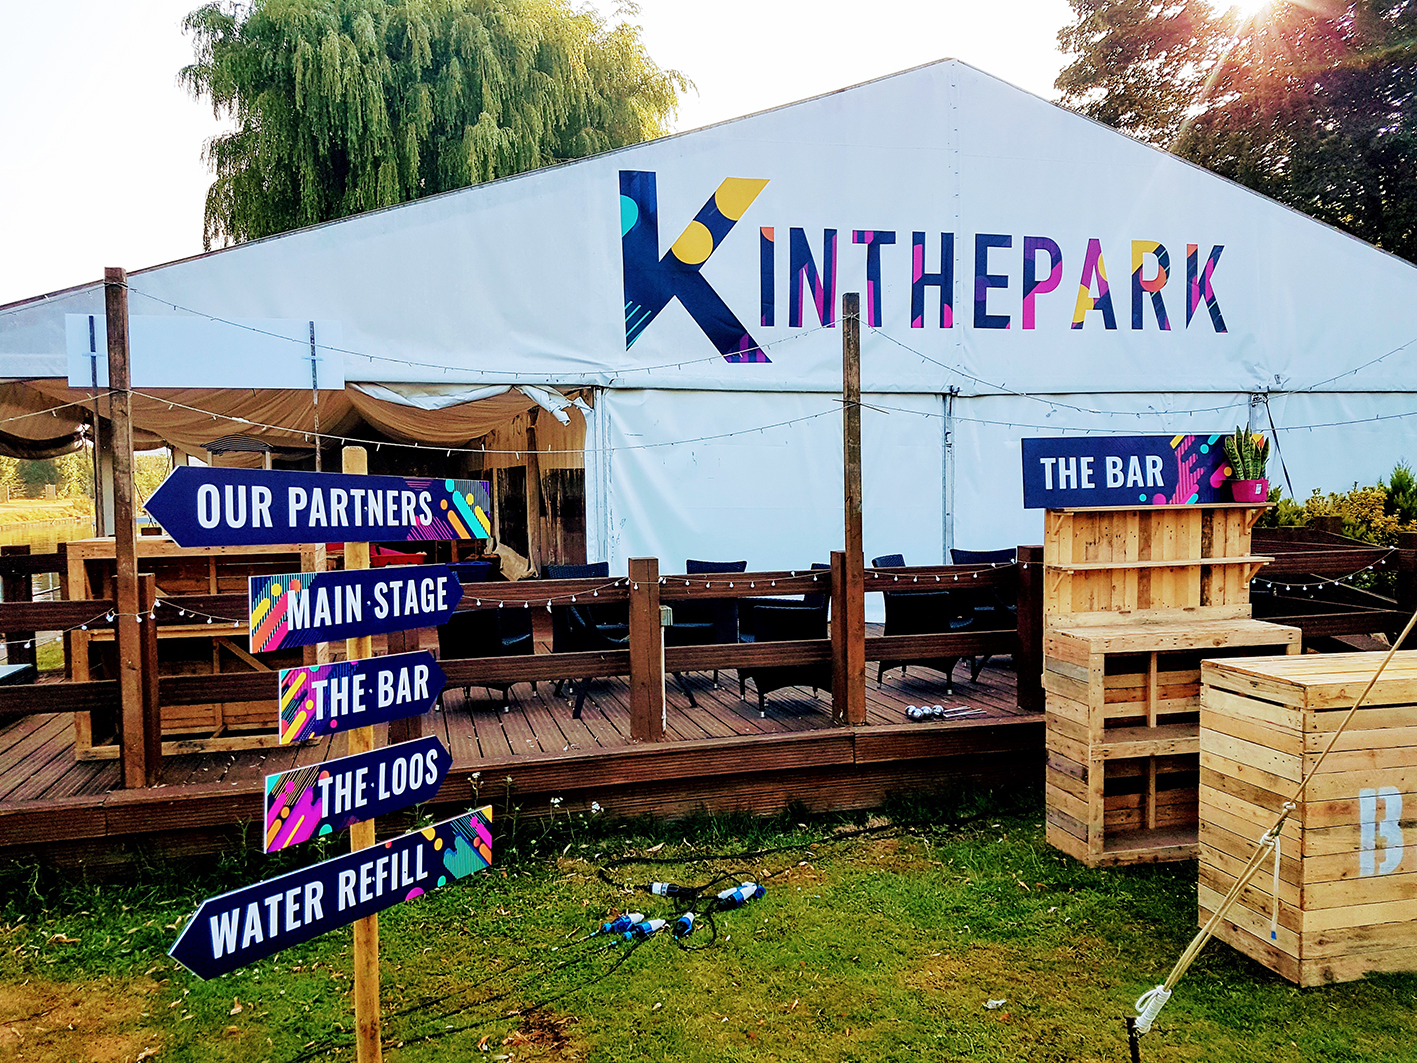 Wayfinding and directional signage for K in the Park event in London.